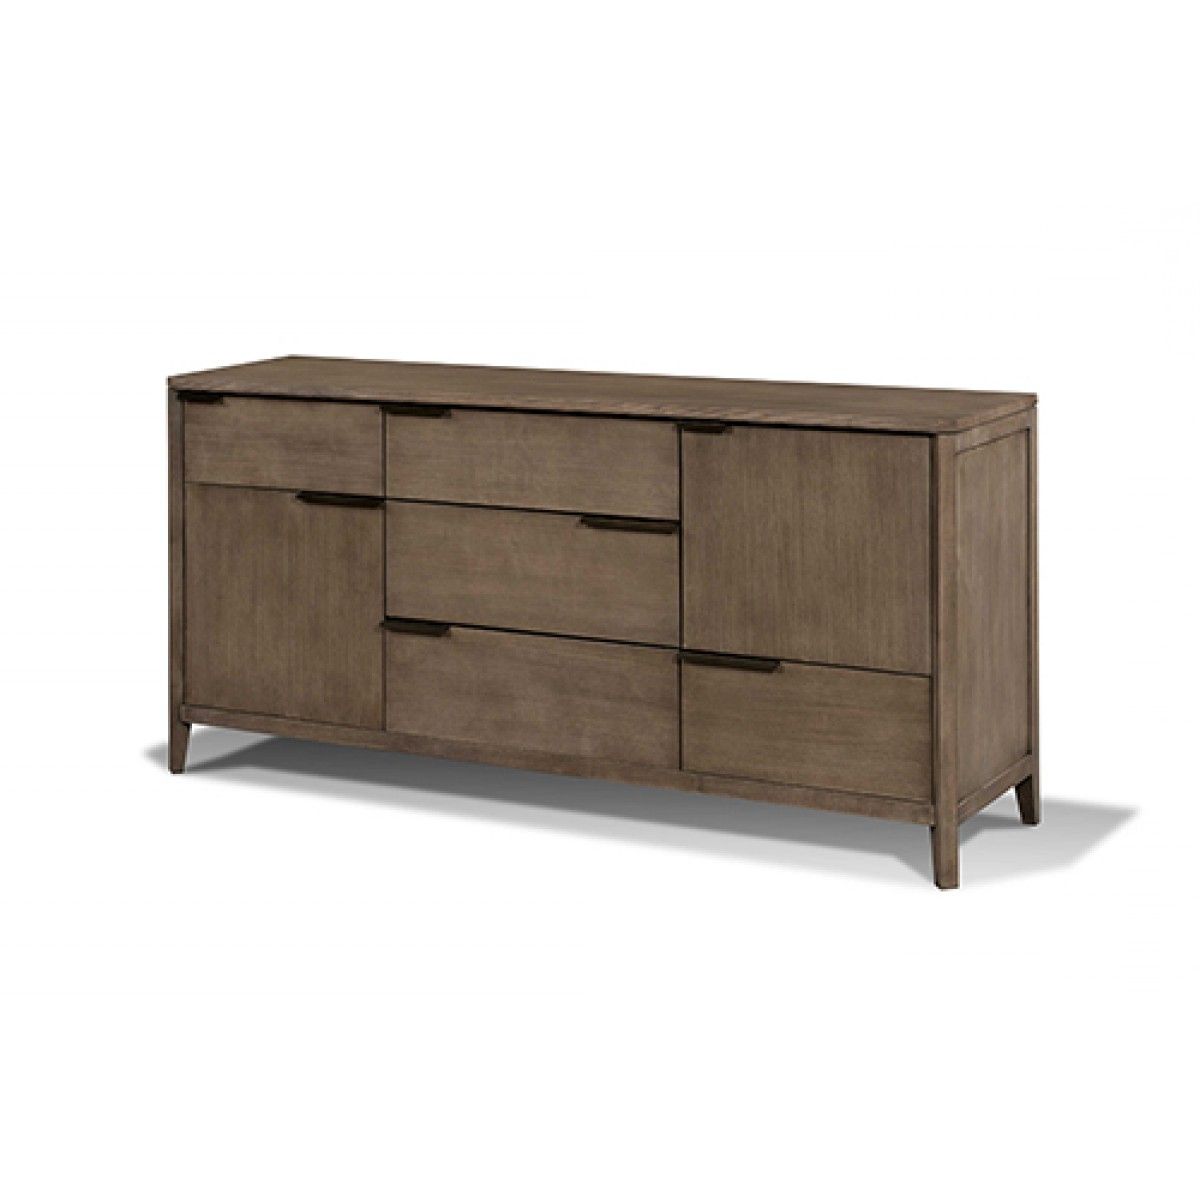 Newest Harden Artistry Candice Buffet In Candice Ii Sideboards (View 13 of 20)